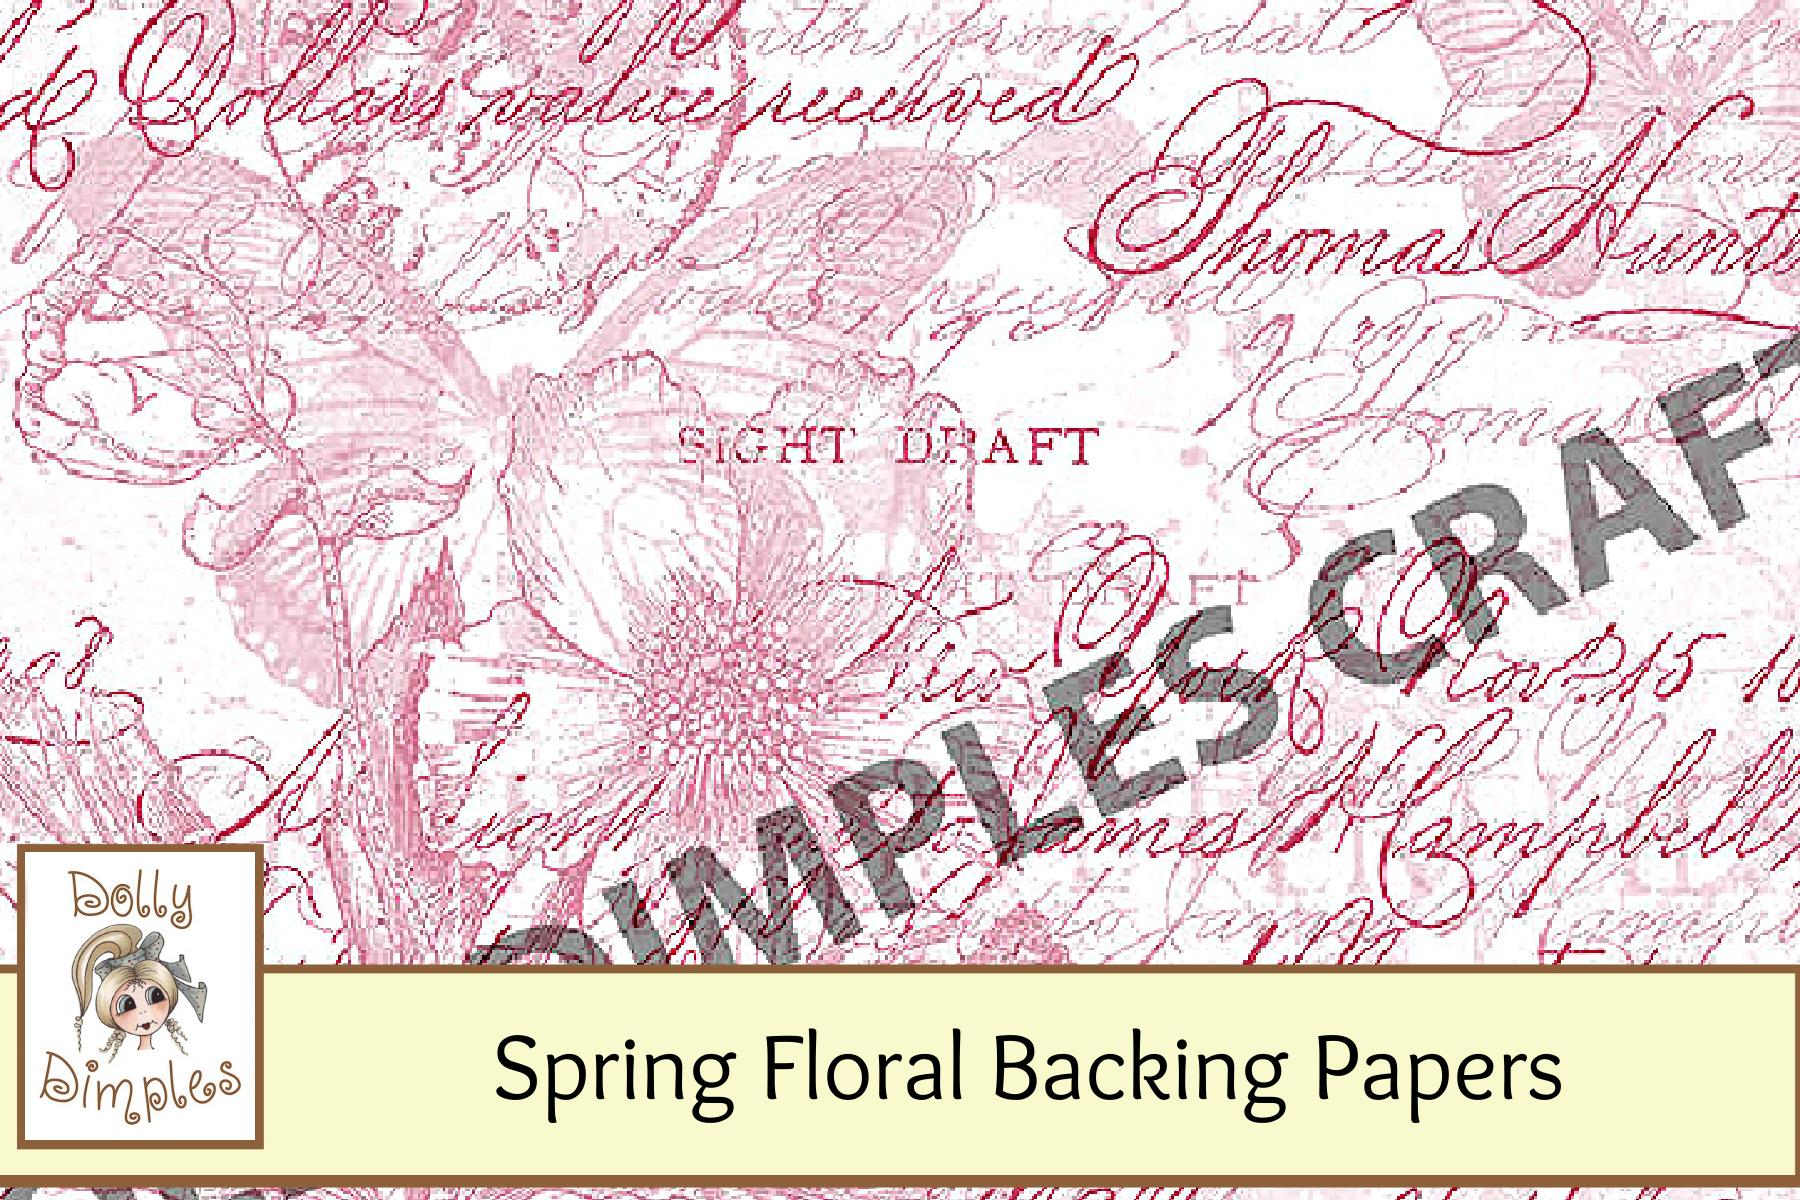 Spring Floral backing papers